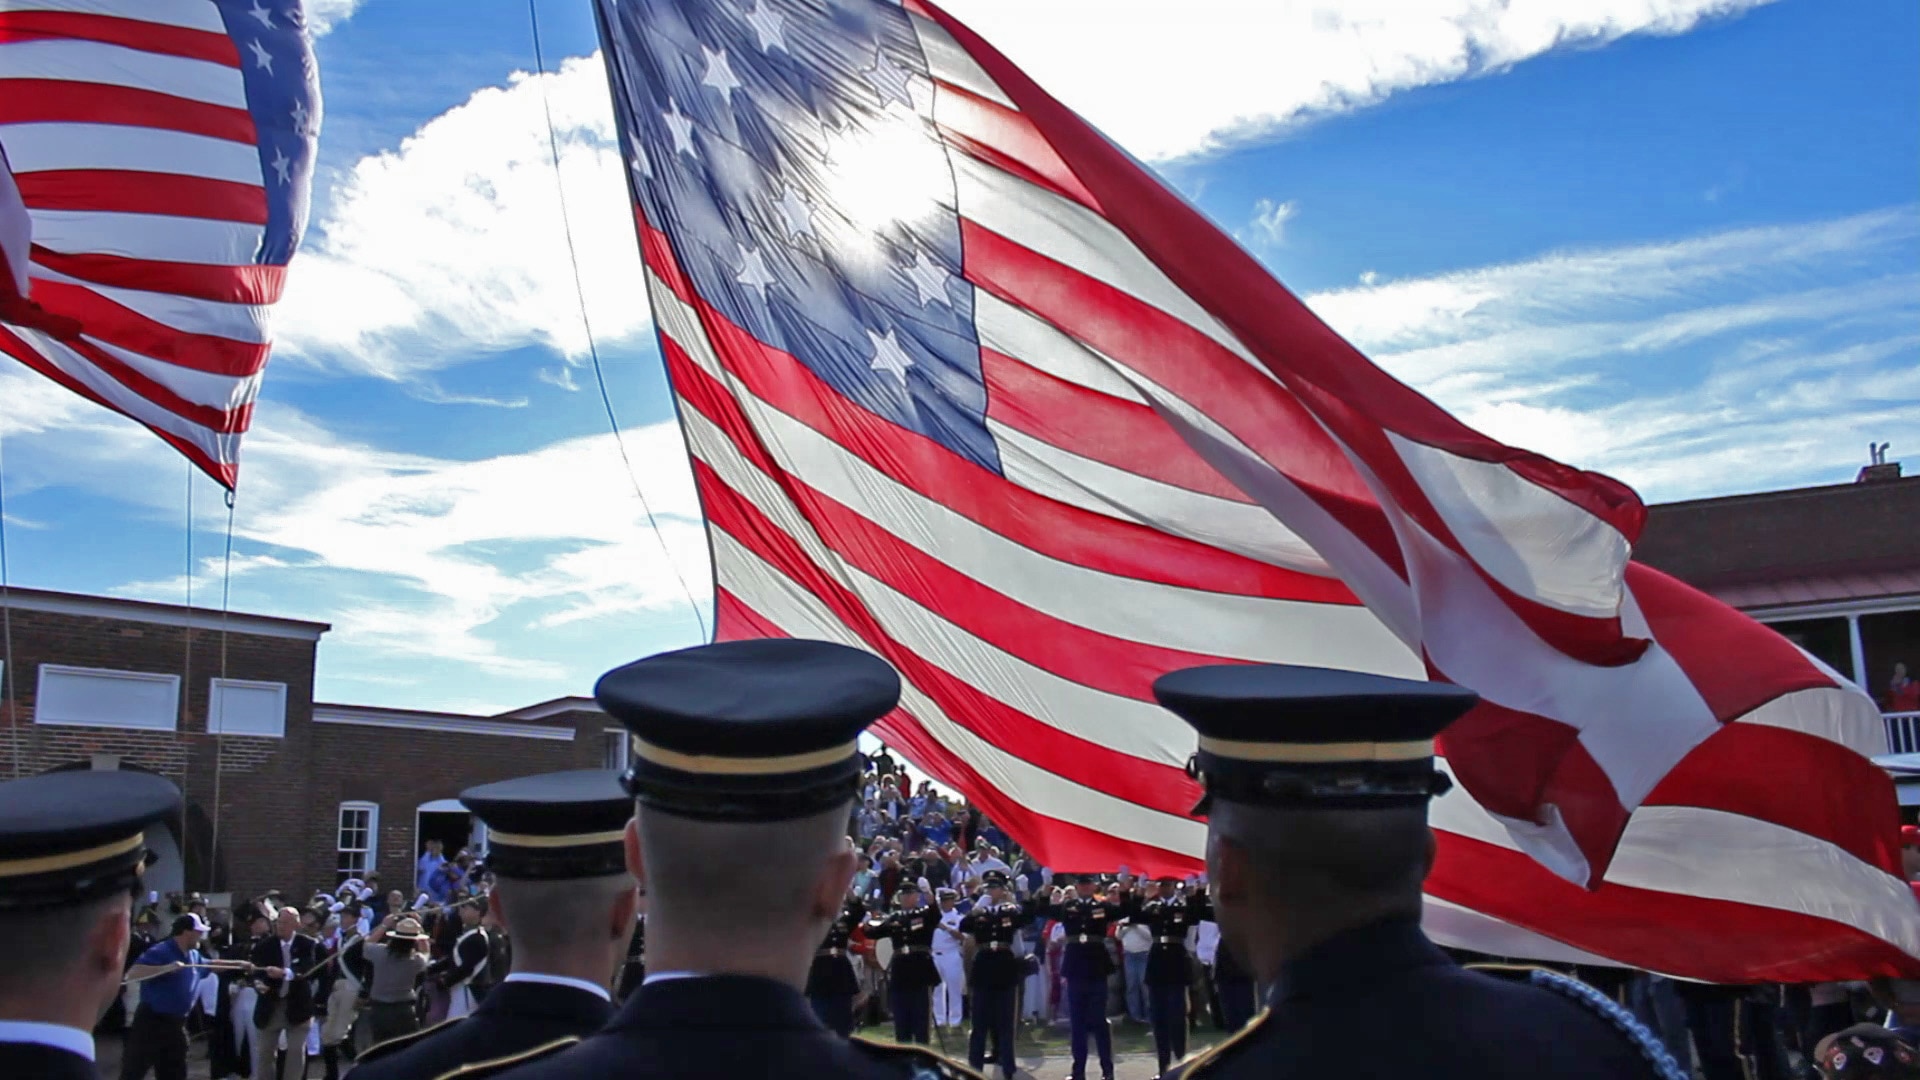 Soldiers from the U.S. Army 3rd Infantry Regiment "Old Guard" unfurl and raise a hand-stitched replica of the 15-star, 15-stripe flag to commemorate the 200th anniversary of the defense of Fort McHenry, Sept. 14, 1814. The ascent of the stars and stripes would inspire 1st Lt. Francis Scott Key of the District of Columbia Militia to pen the immortal words that would become the national anthem. The flag was raised at exactly the same day and time as it was 200 years ago during the War of 1812.